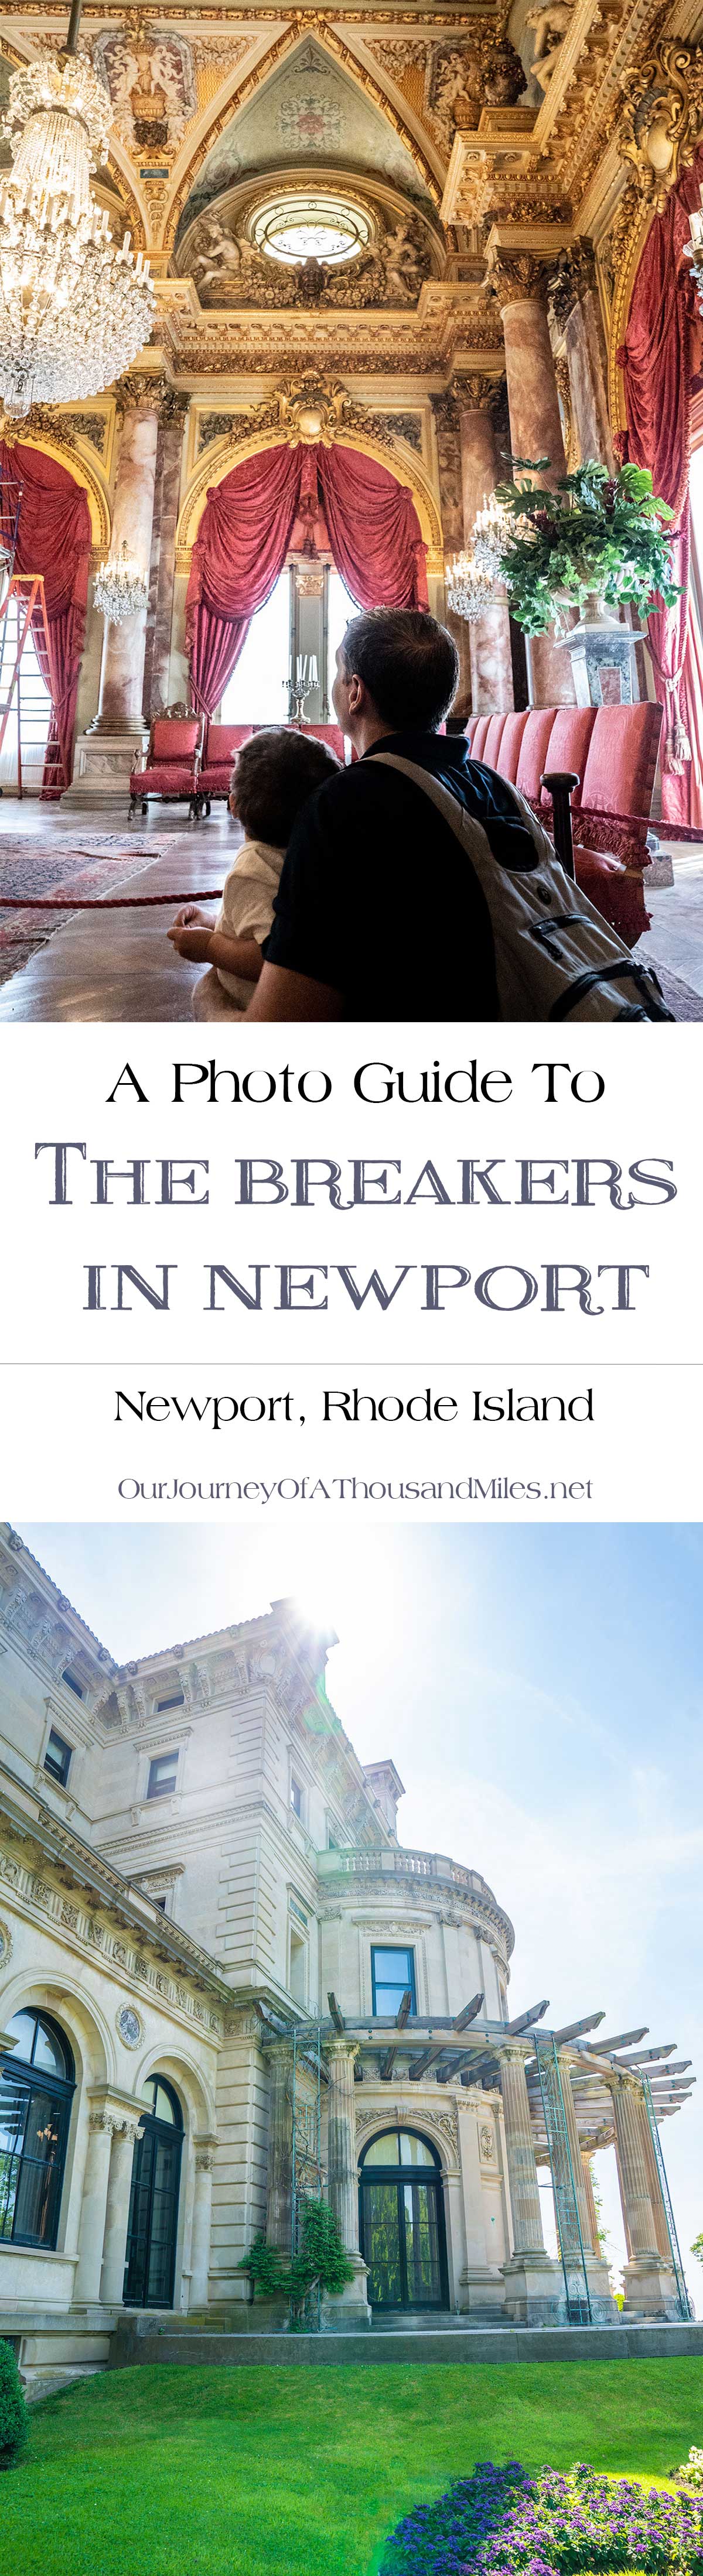 A-Photo-Guide-To-The-Breakers-In-Newport-Rhode-Island